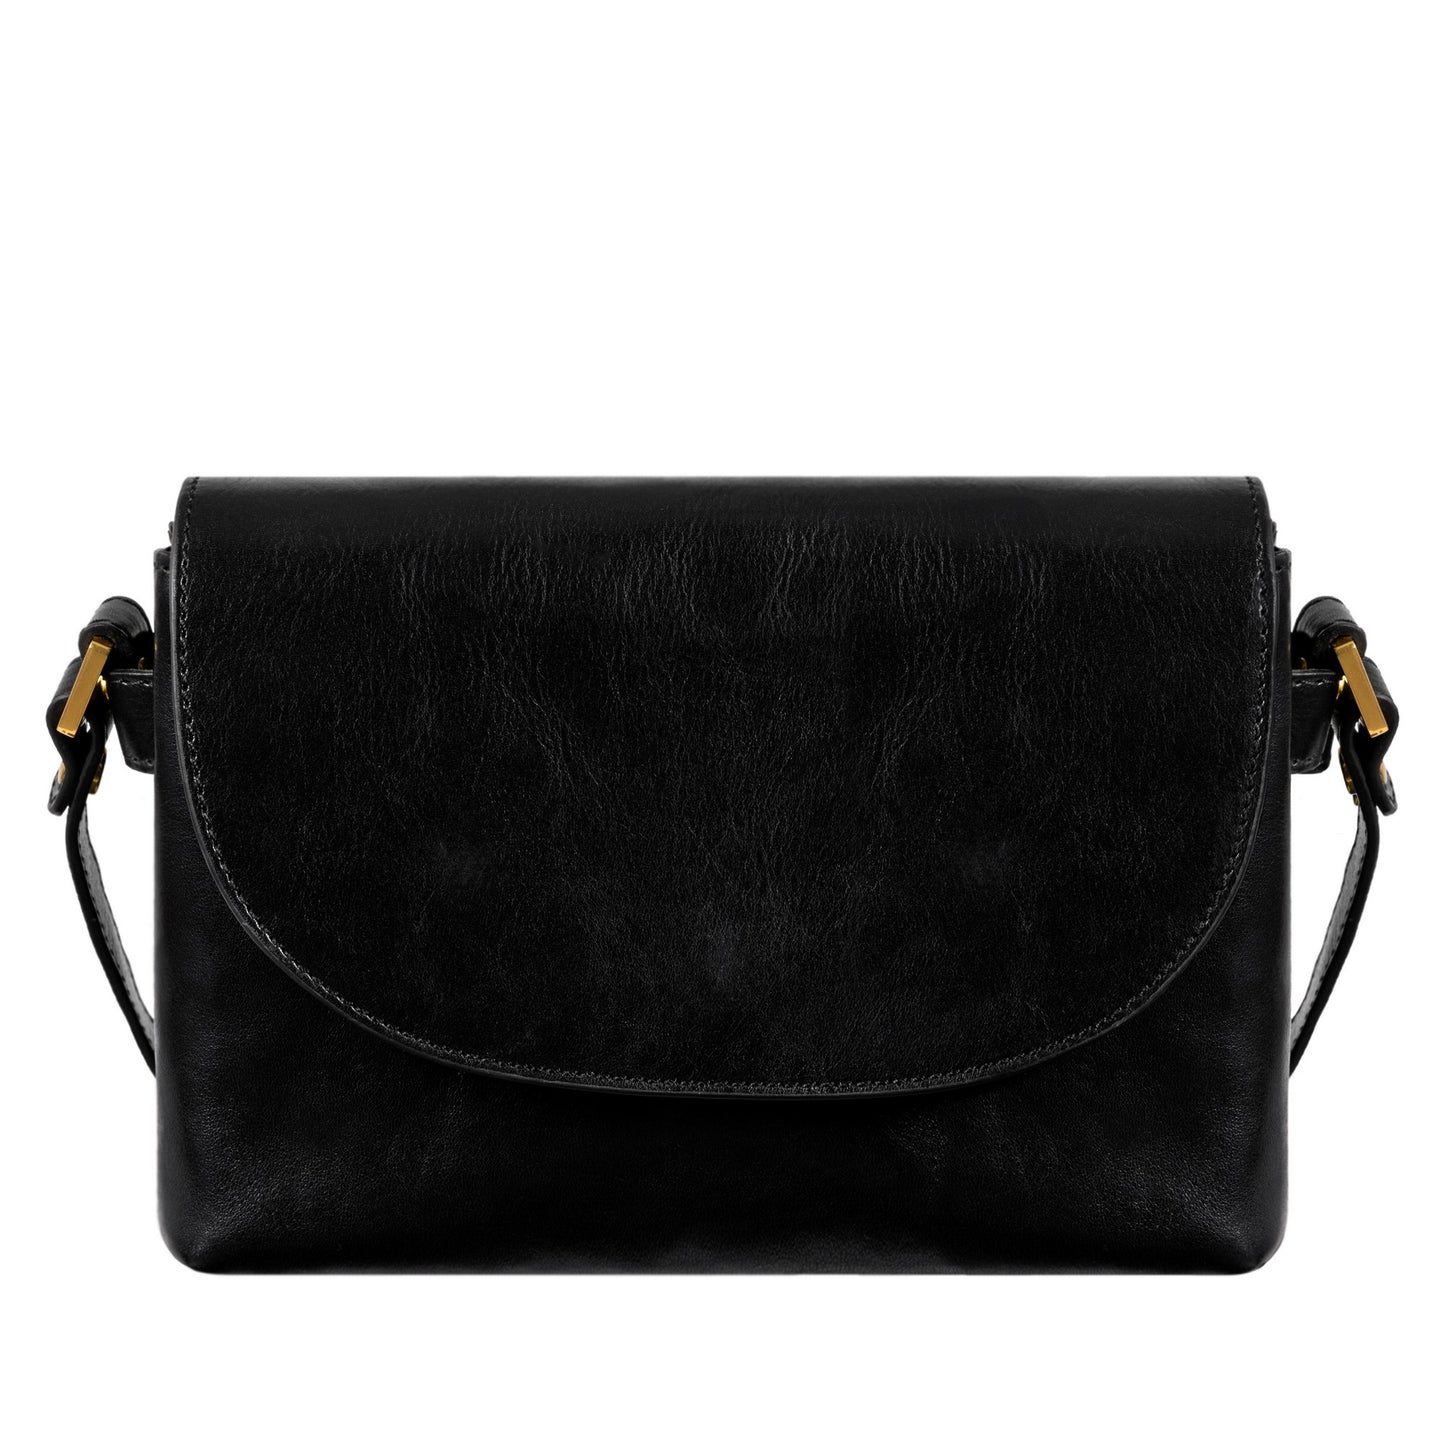 Leather Cross Body Bag - Sophie's Choice